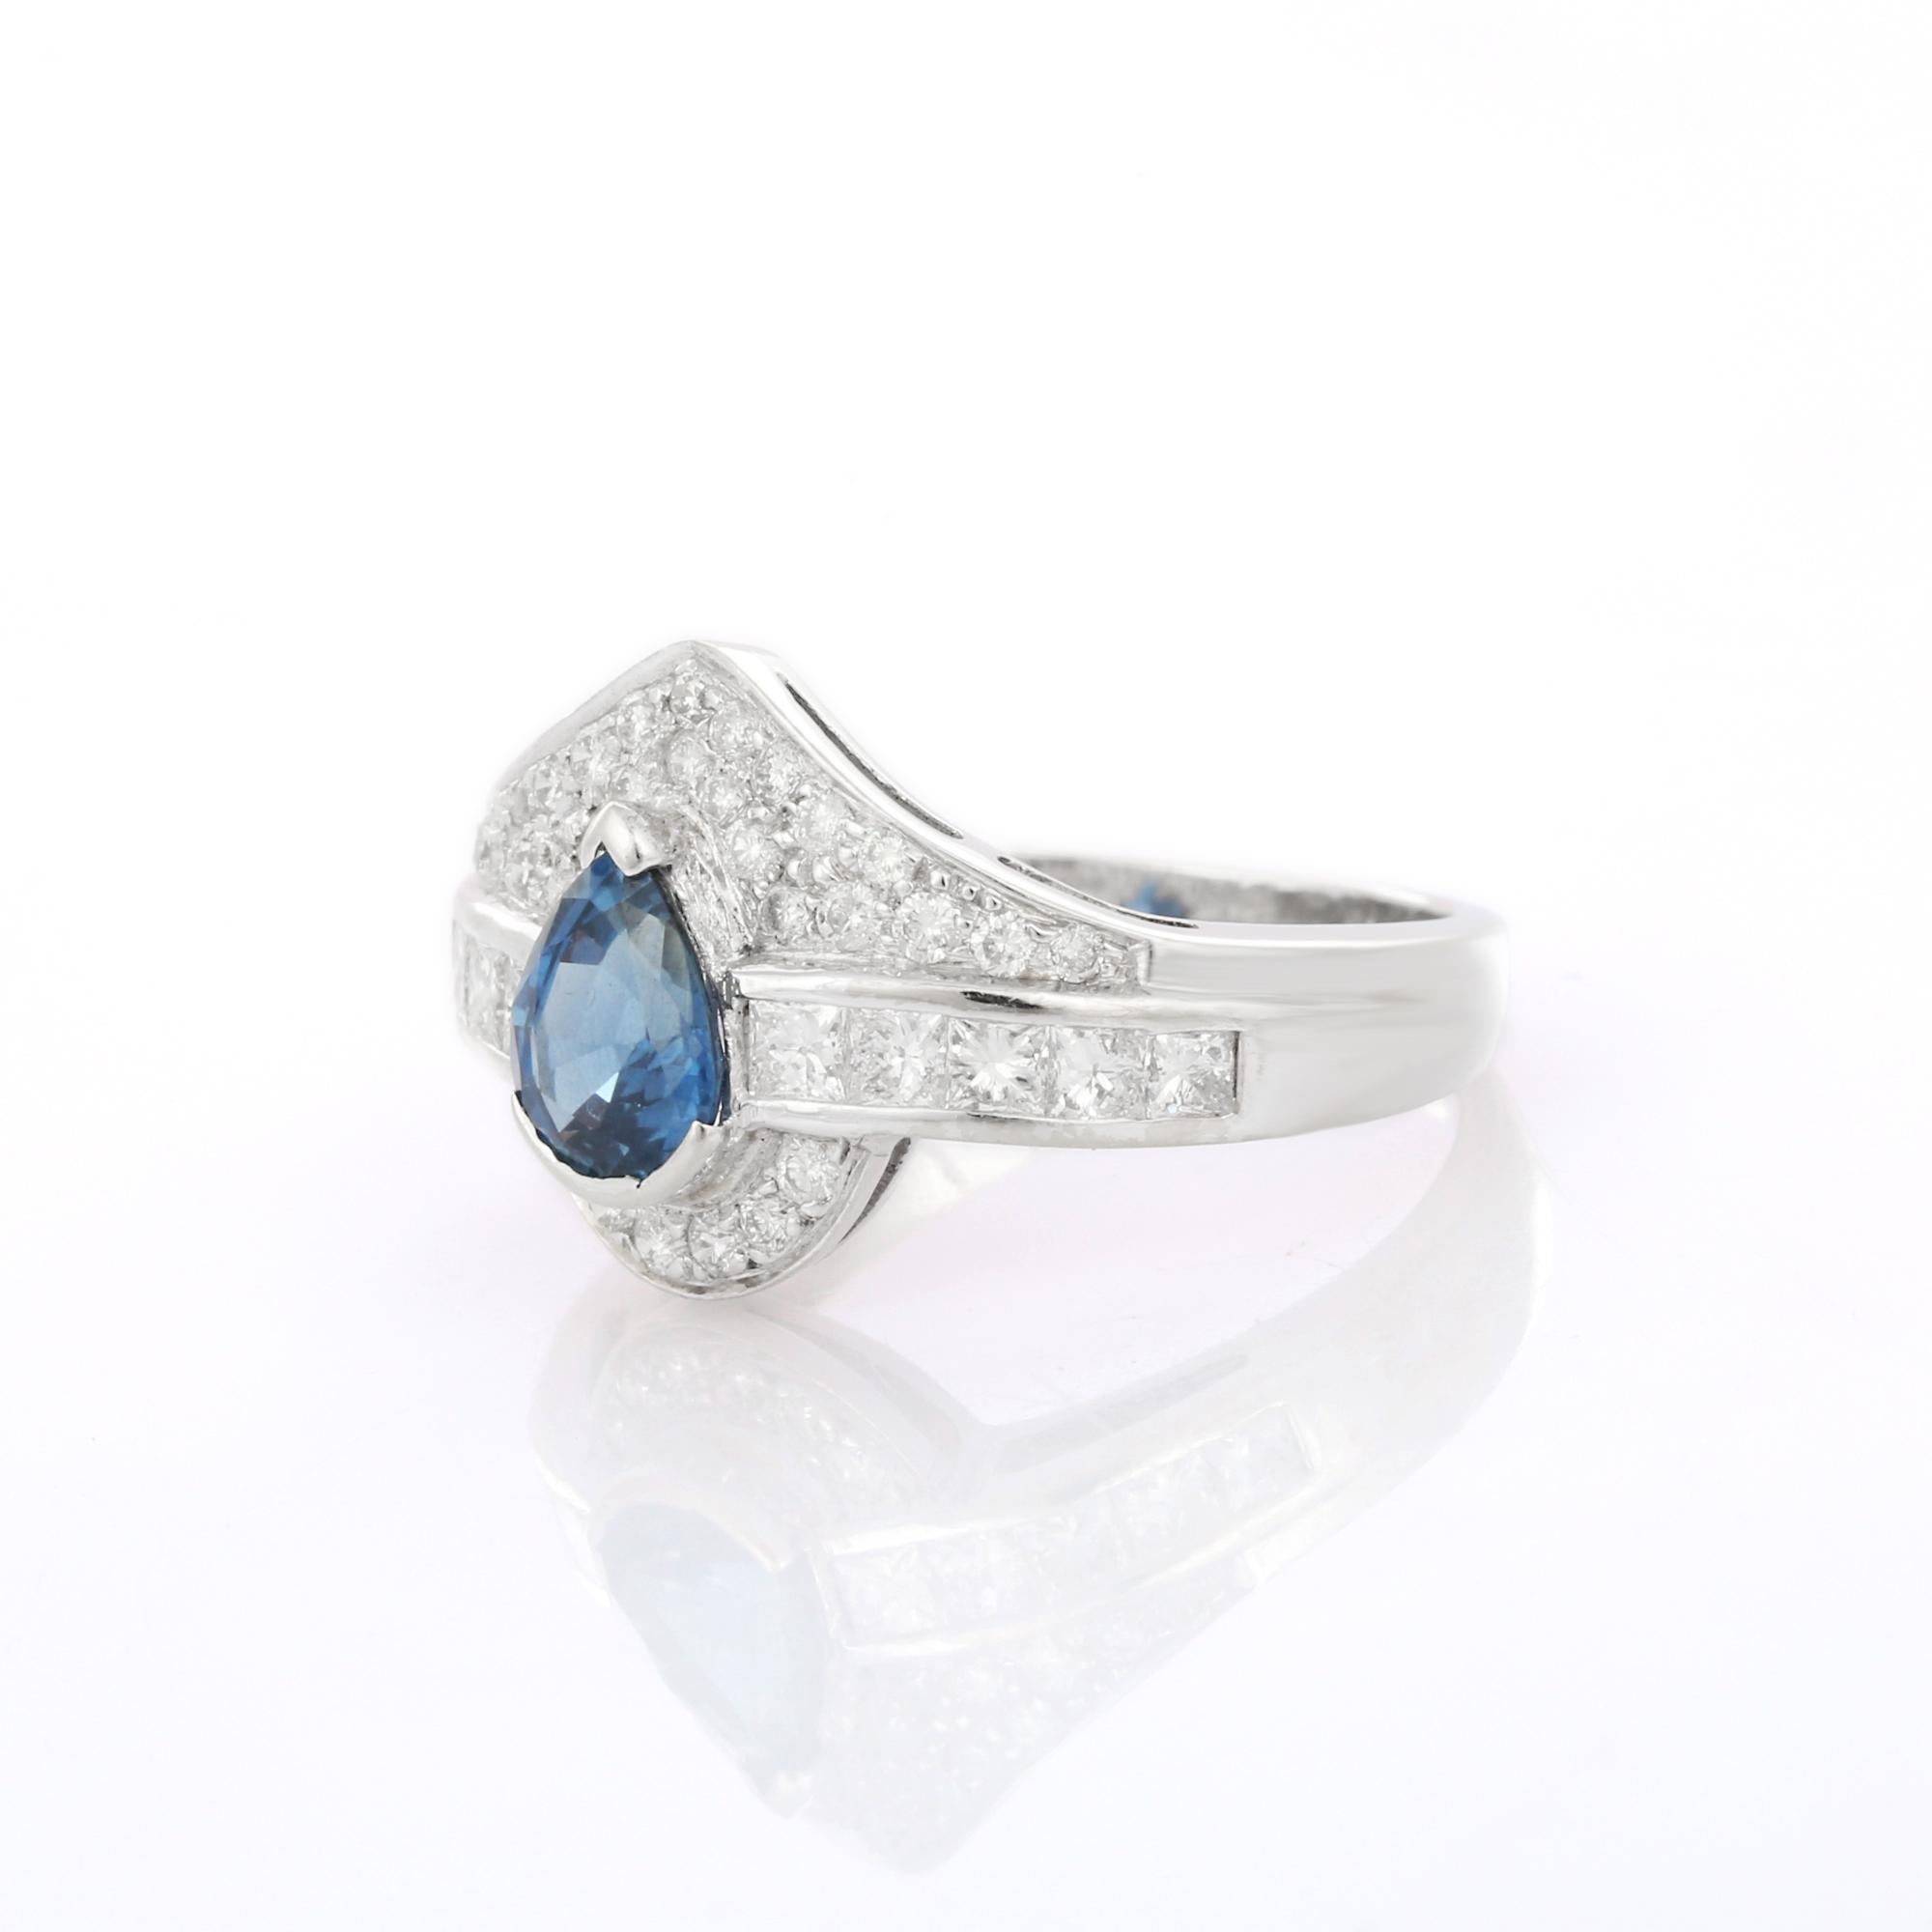 For Sale:  Regal Pear Cut Sapphire Diamond Wedding Ring in 18K White Gold 3